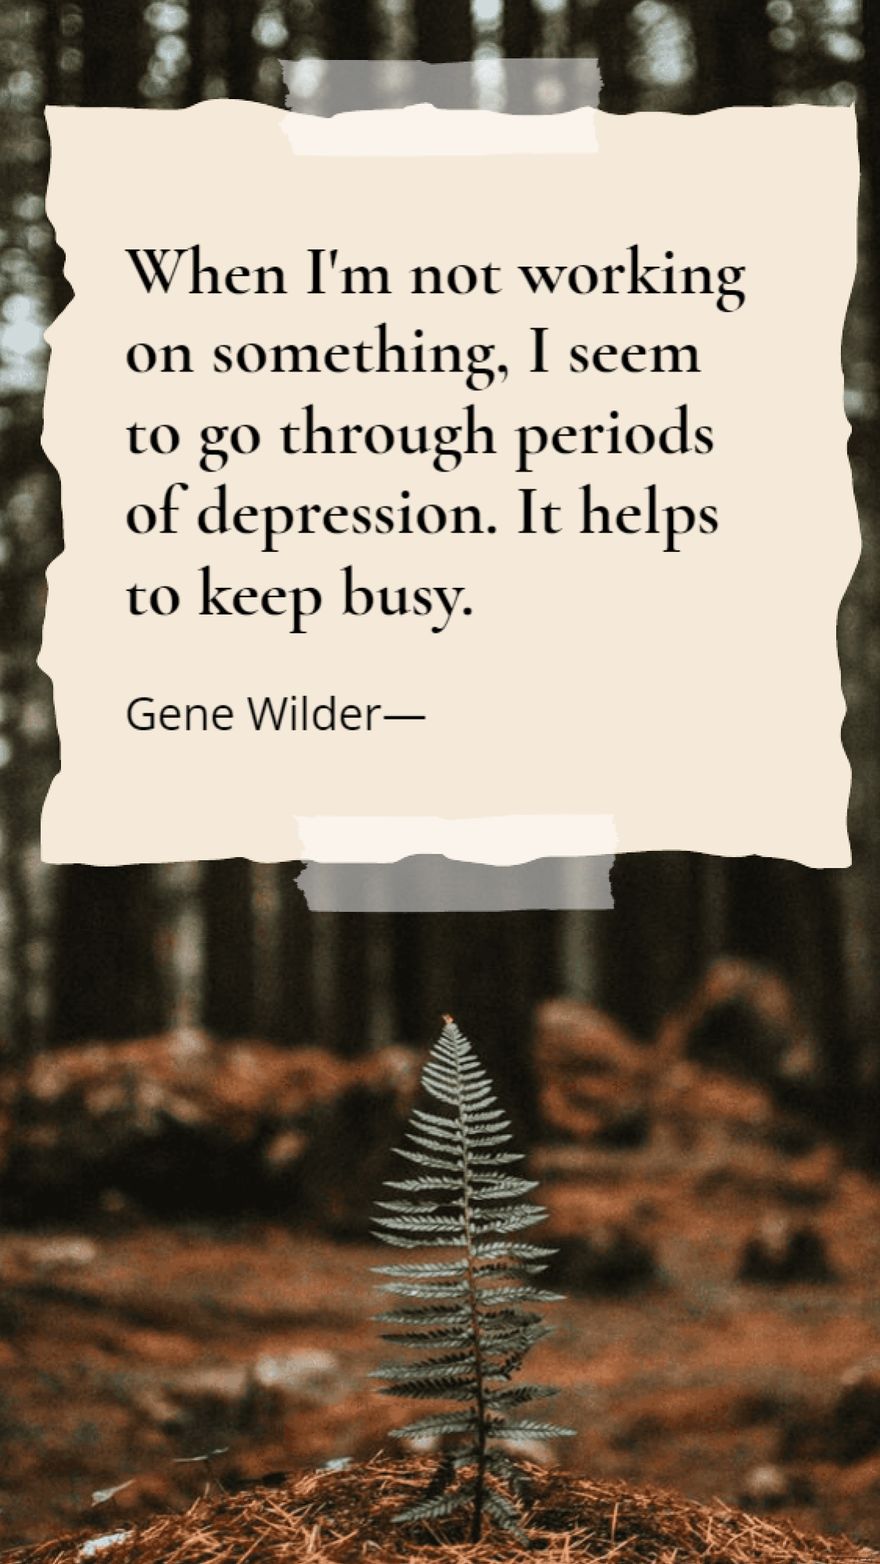 Gene Wilder - When I'm not working on something, I seem to go through periods of depression. It helps to keep busy.